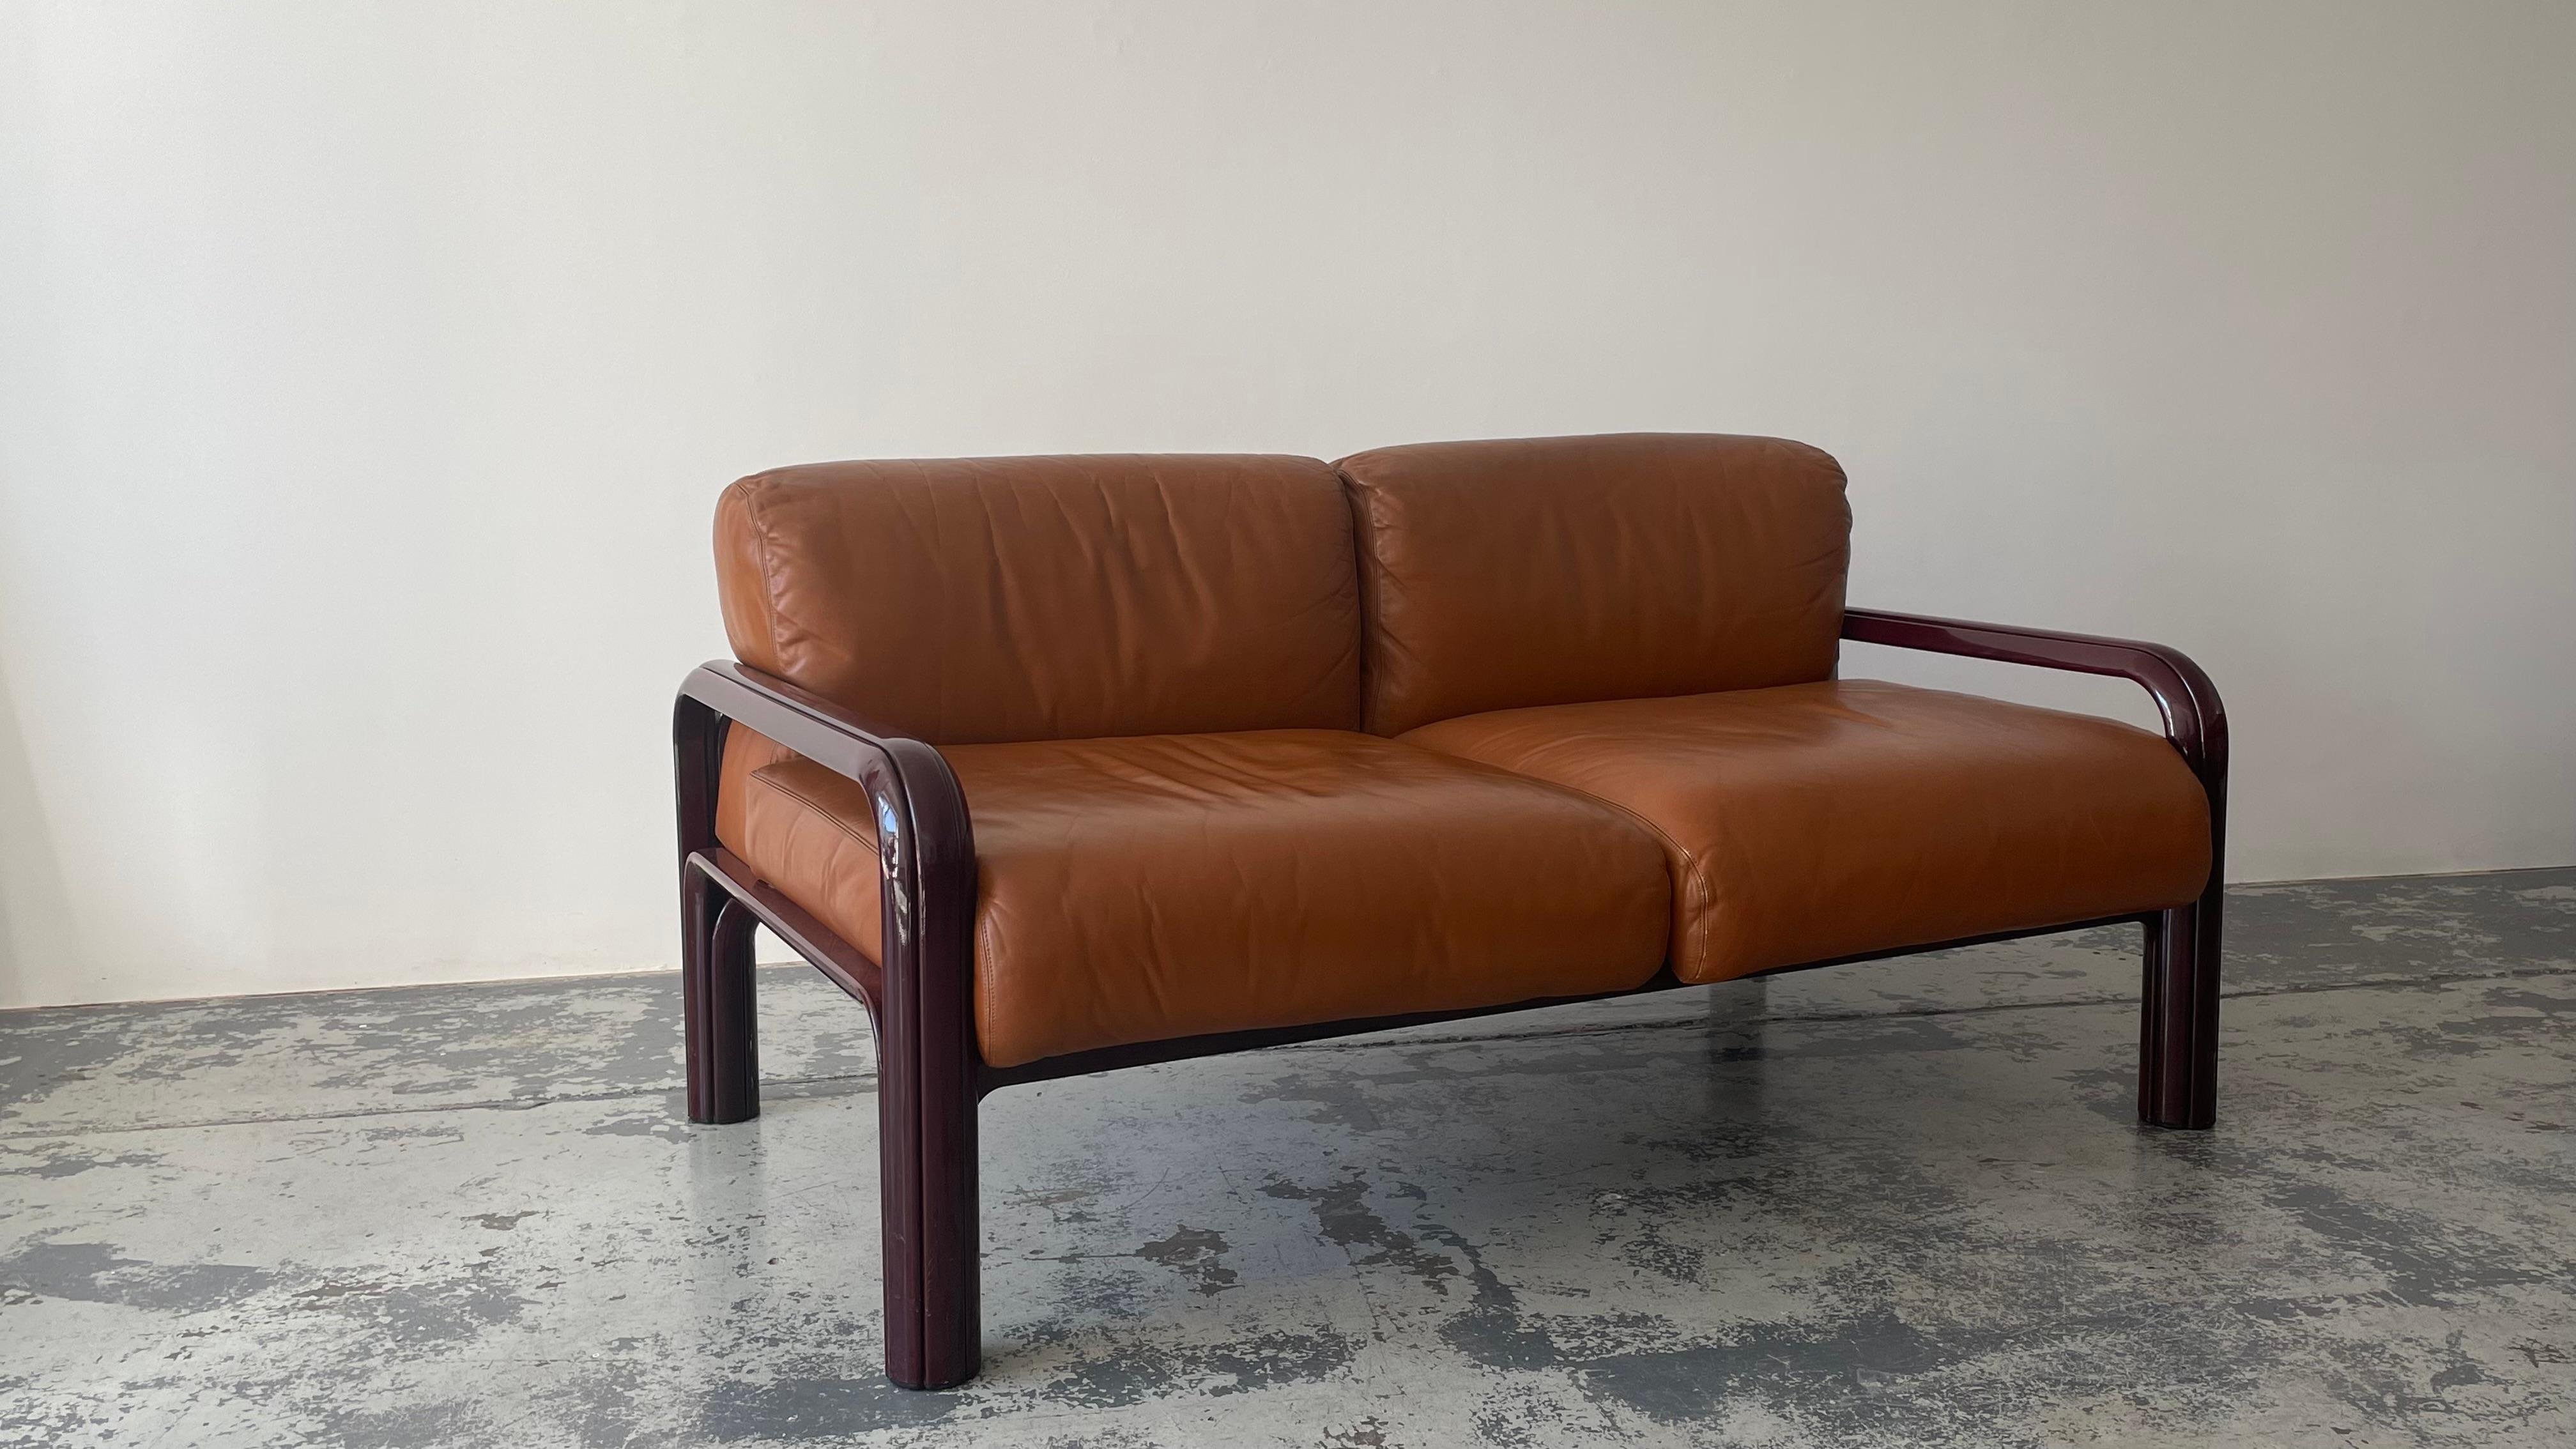 Two Seaters Sofa in cognac leather designed by Gae Aulenti in 1976 as part of the lounge seating line for the Aulenti Collection of Knoll International.

The lacquered burgundy frames are made from extruded steel.

The leather is in great